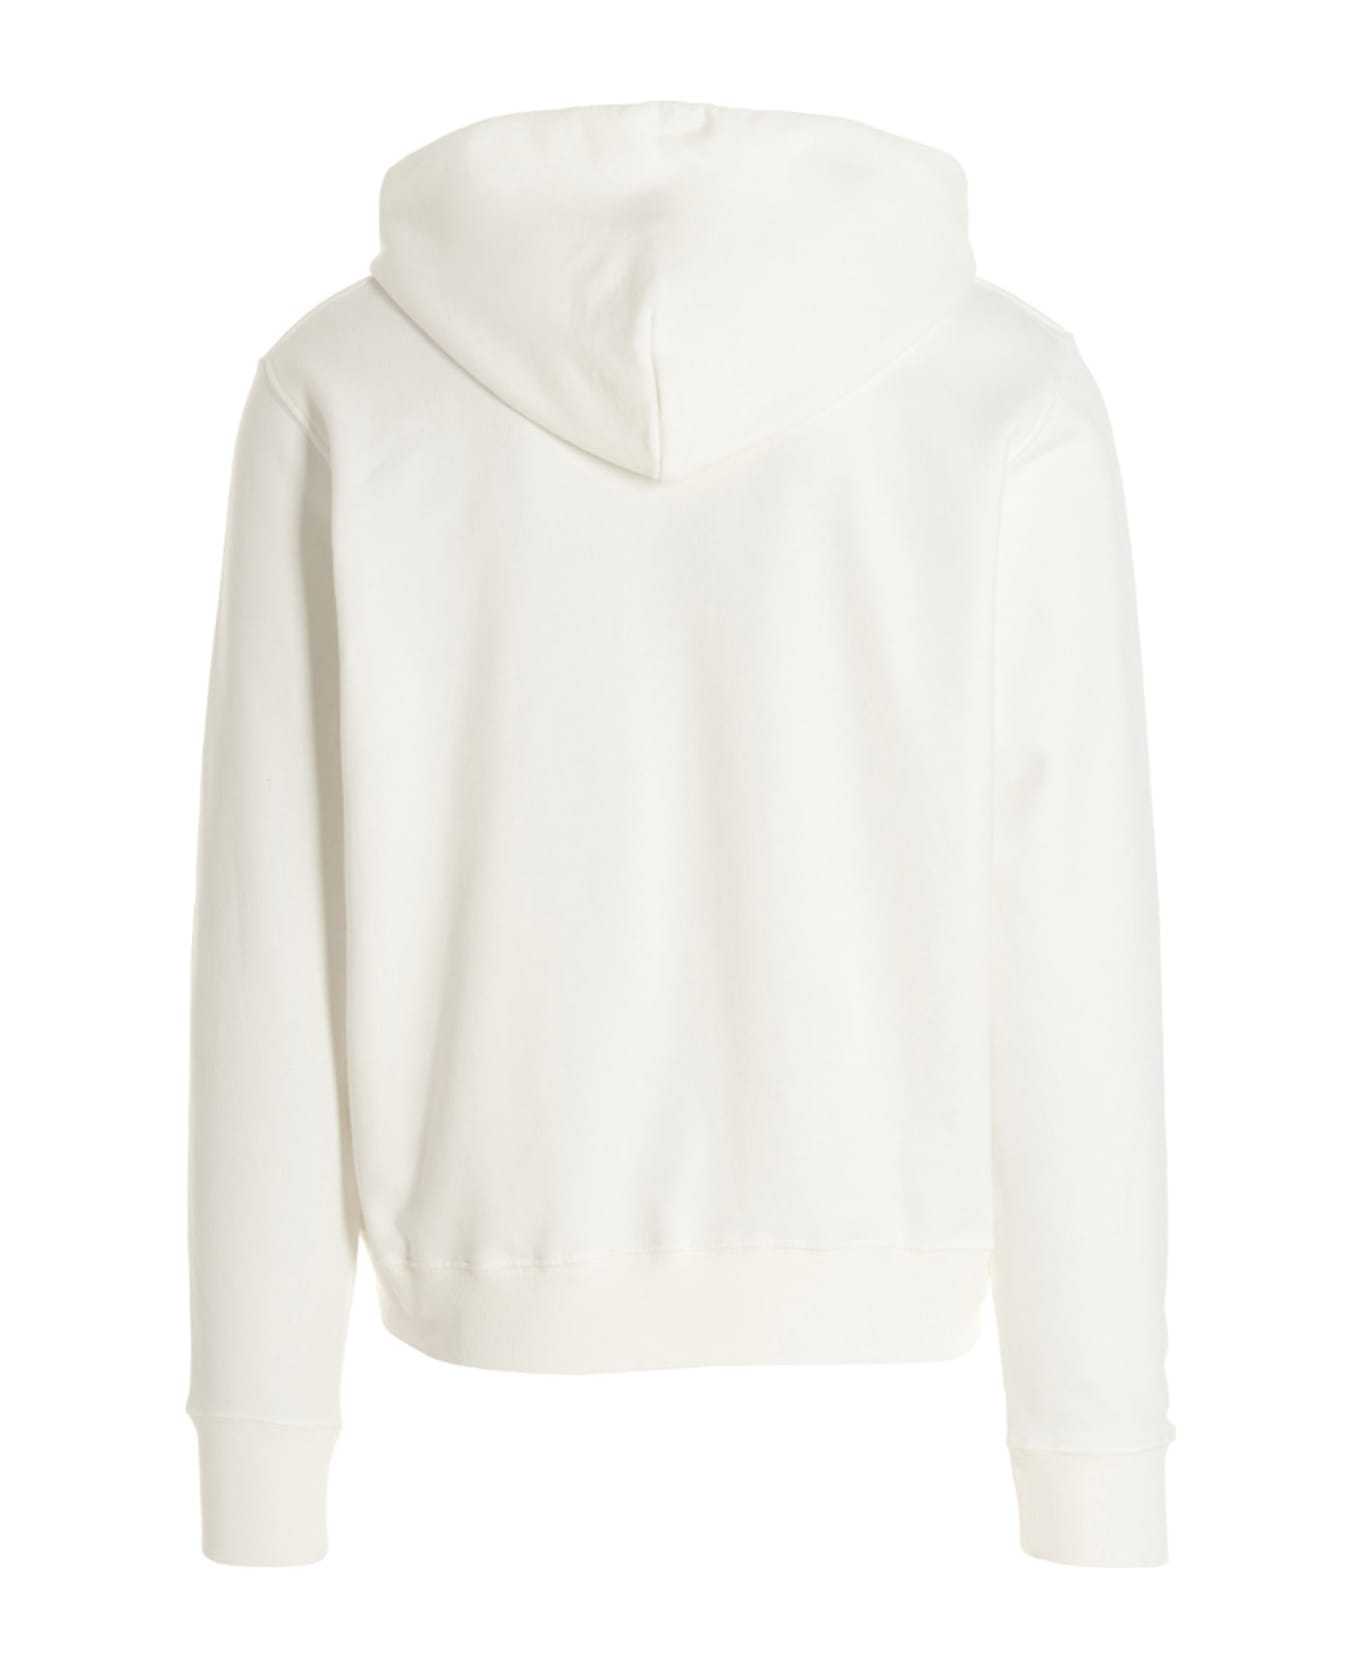 Autry Iconic Action Hoodie - WHITE